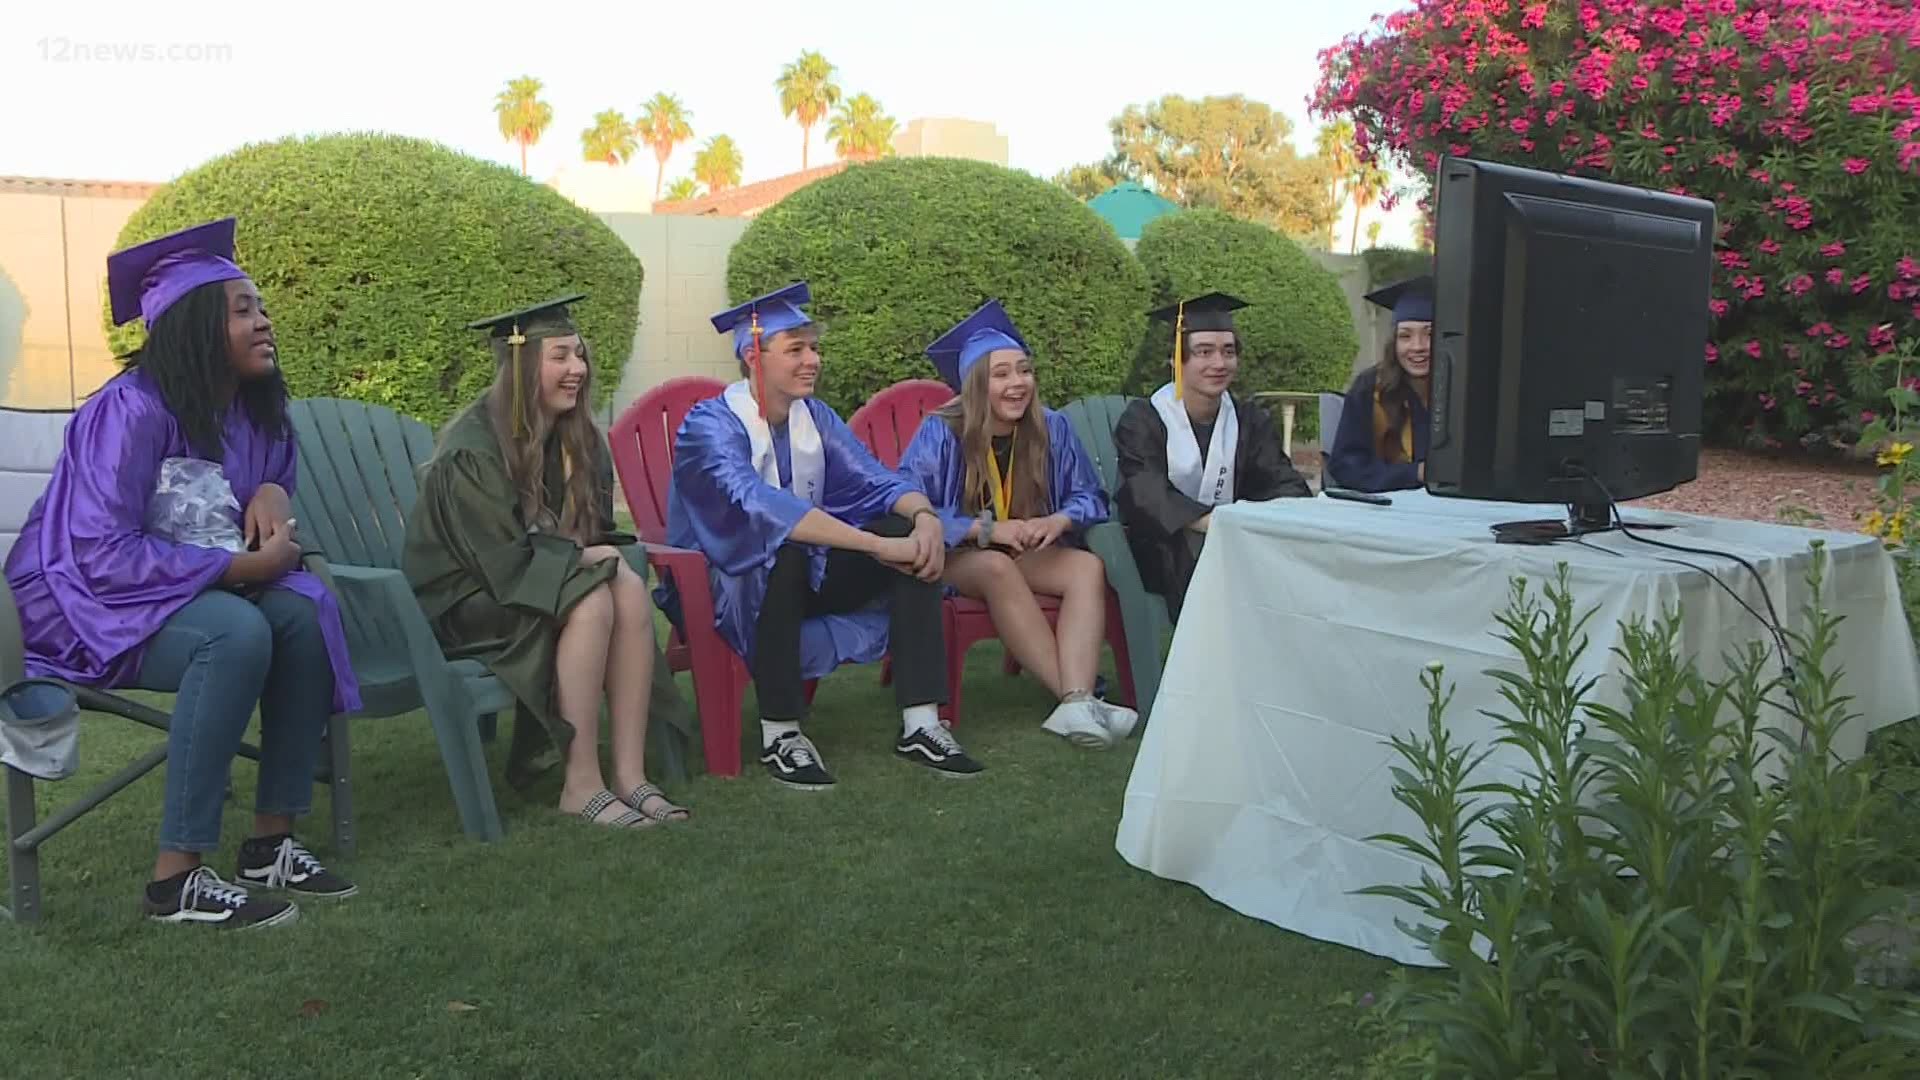 Seniors across the country got a sendoff from some big names in the “Graduate Together” broadcast, and some local leaders of this year’s class were featured too.